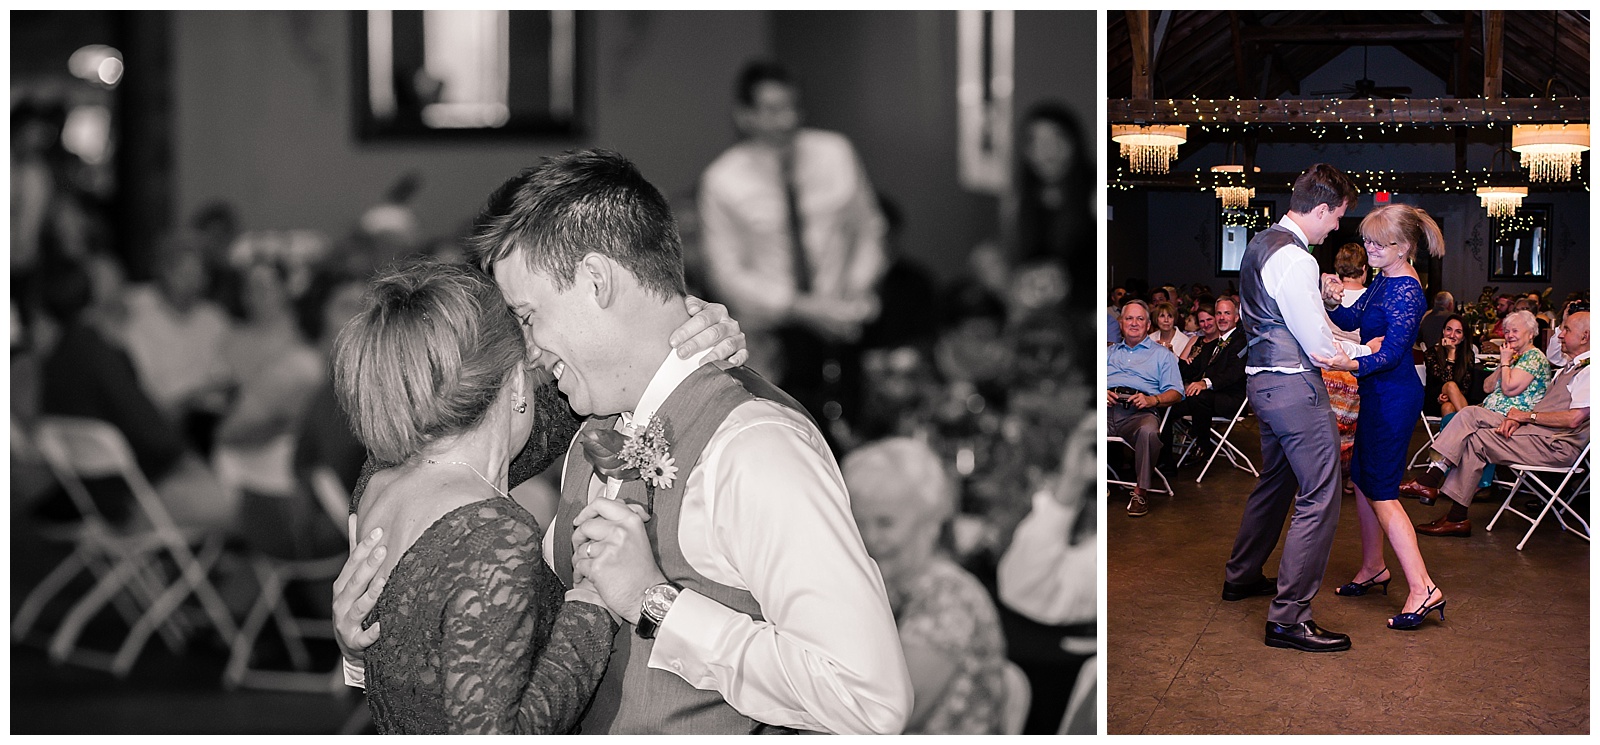 Wedding photography at The W Banquet Hall in Lawrence, Kansas.